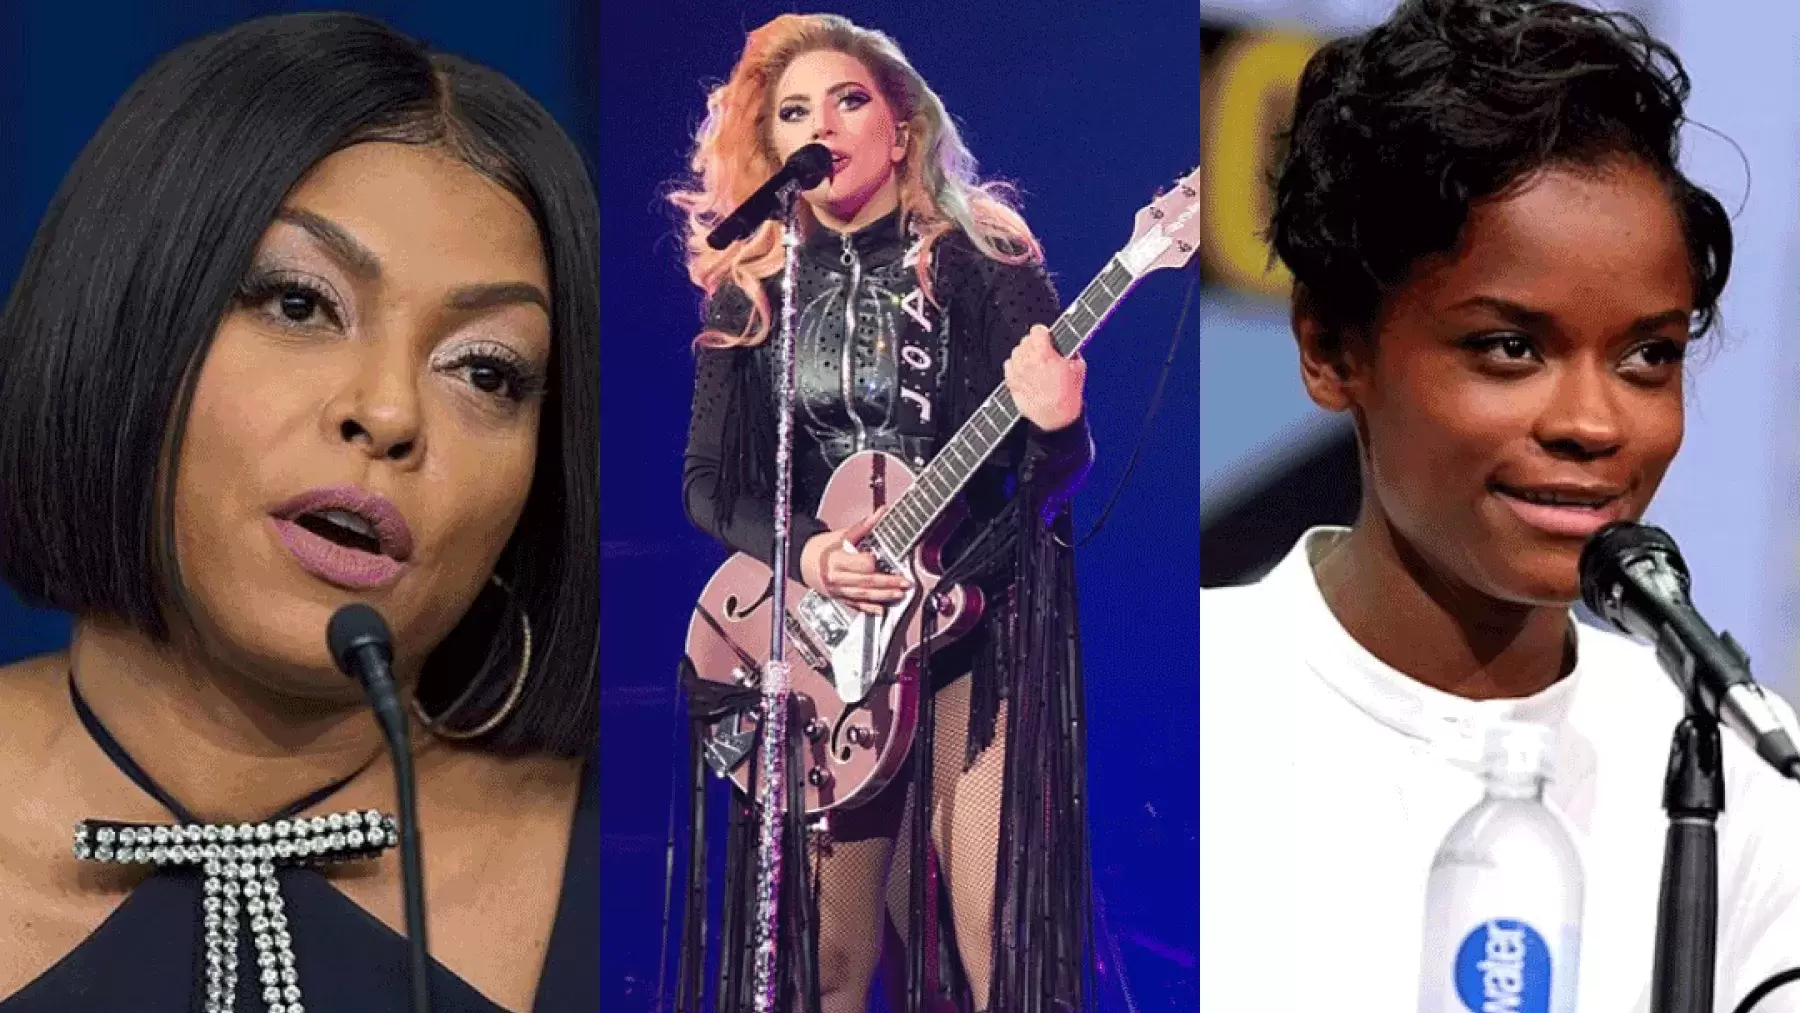 Taraji P. Henson at microphone next to Lady Gaga playing guitar and singing next to Letitia Wright also at microphone